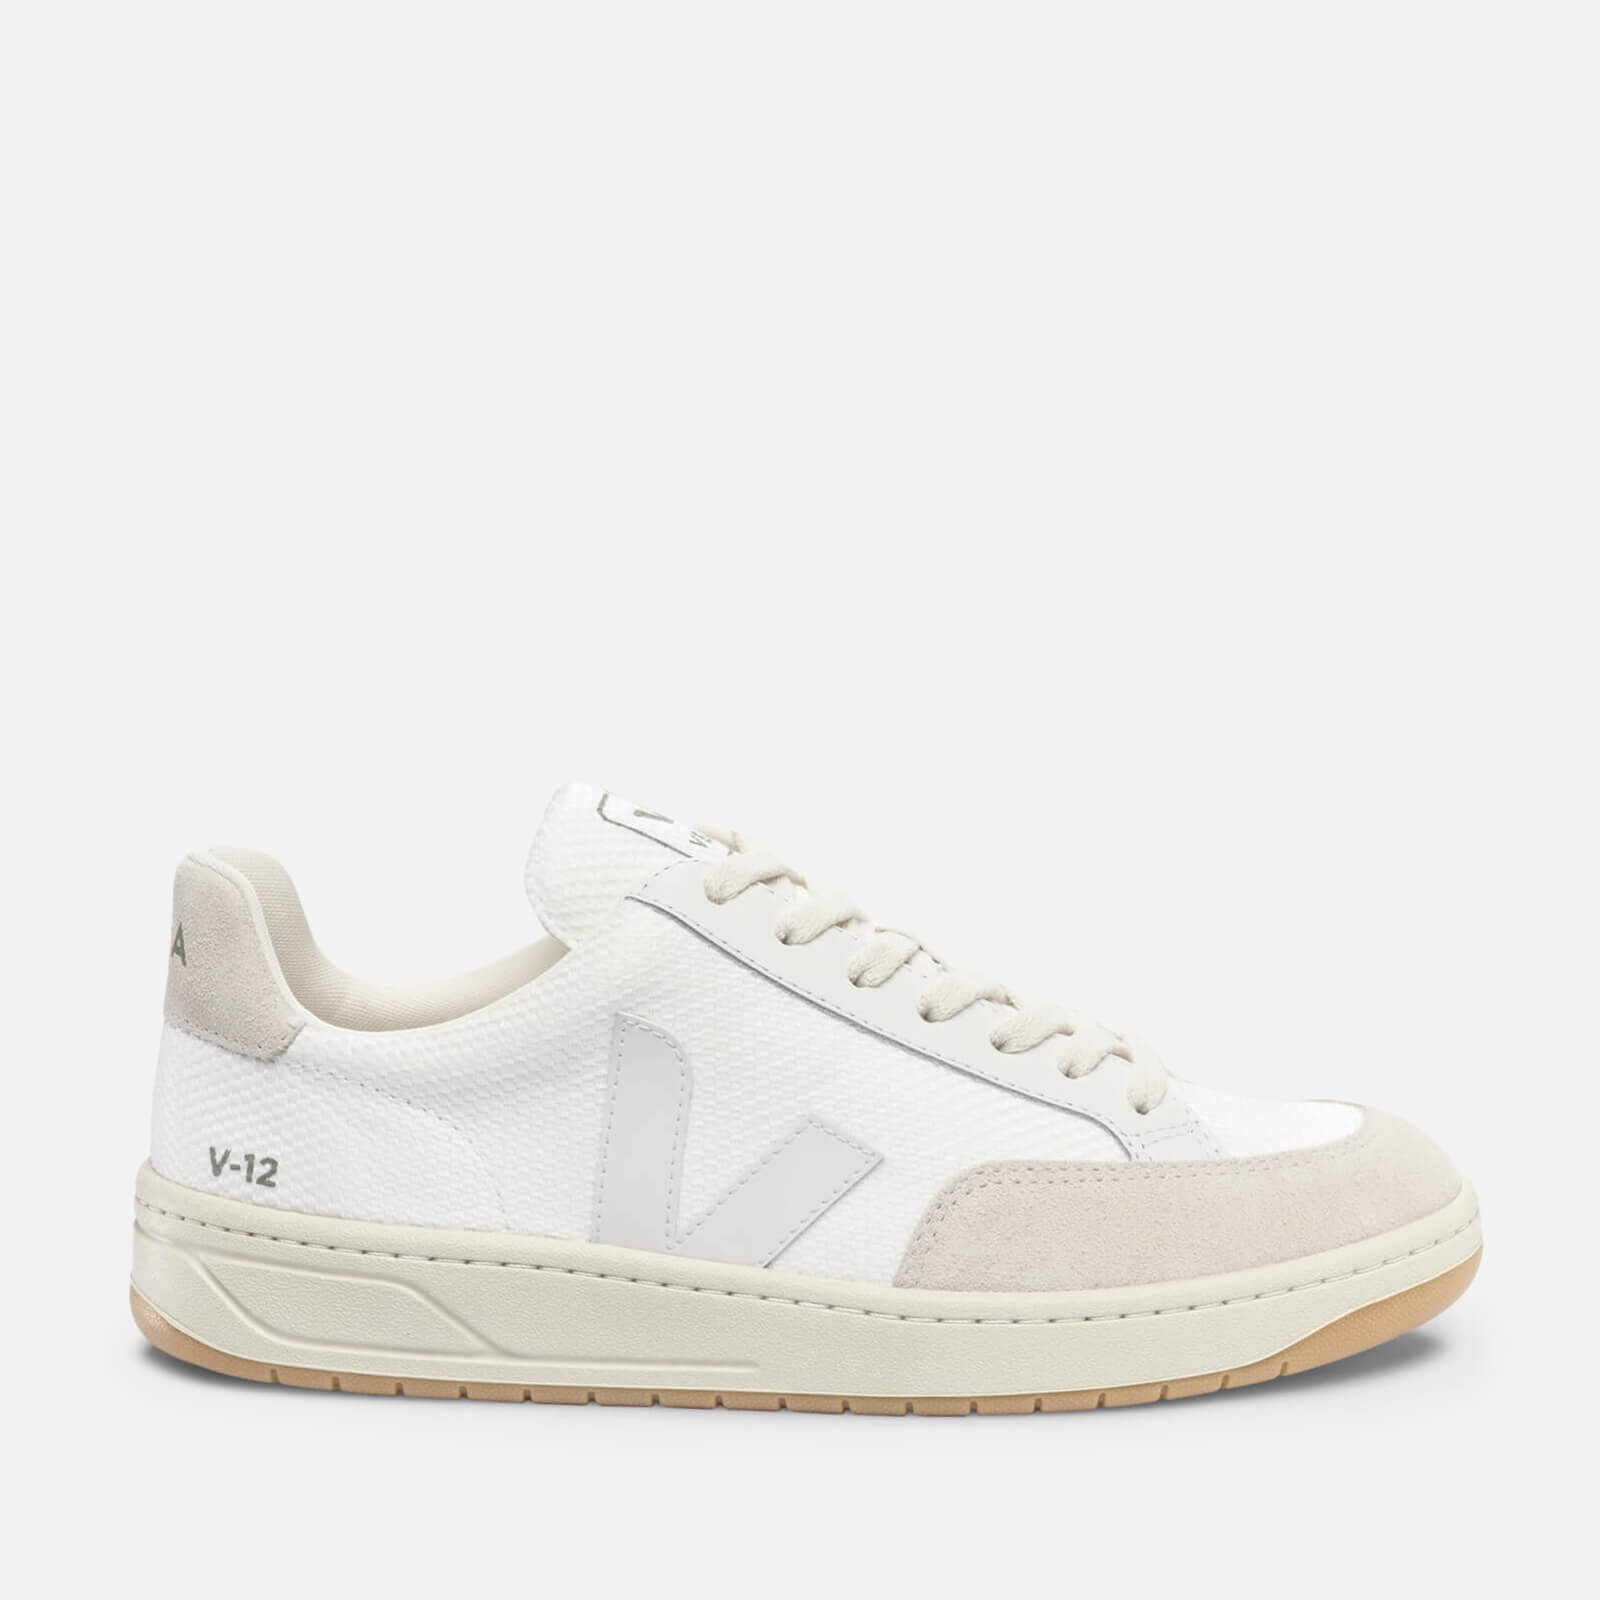 Veja Men's V-12 B Mesh and Suede Trainers